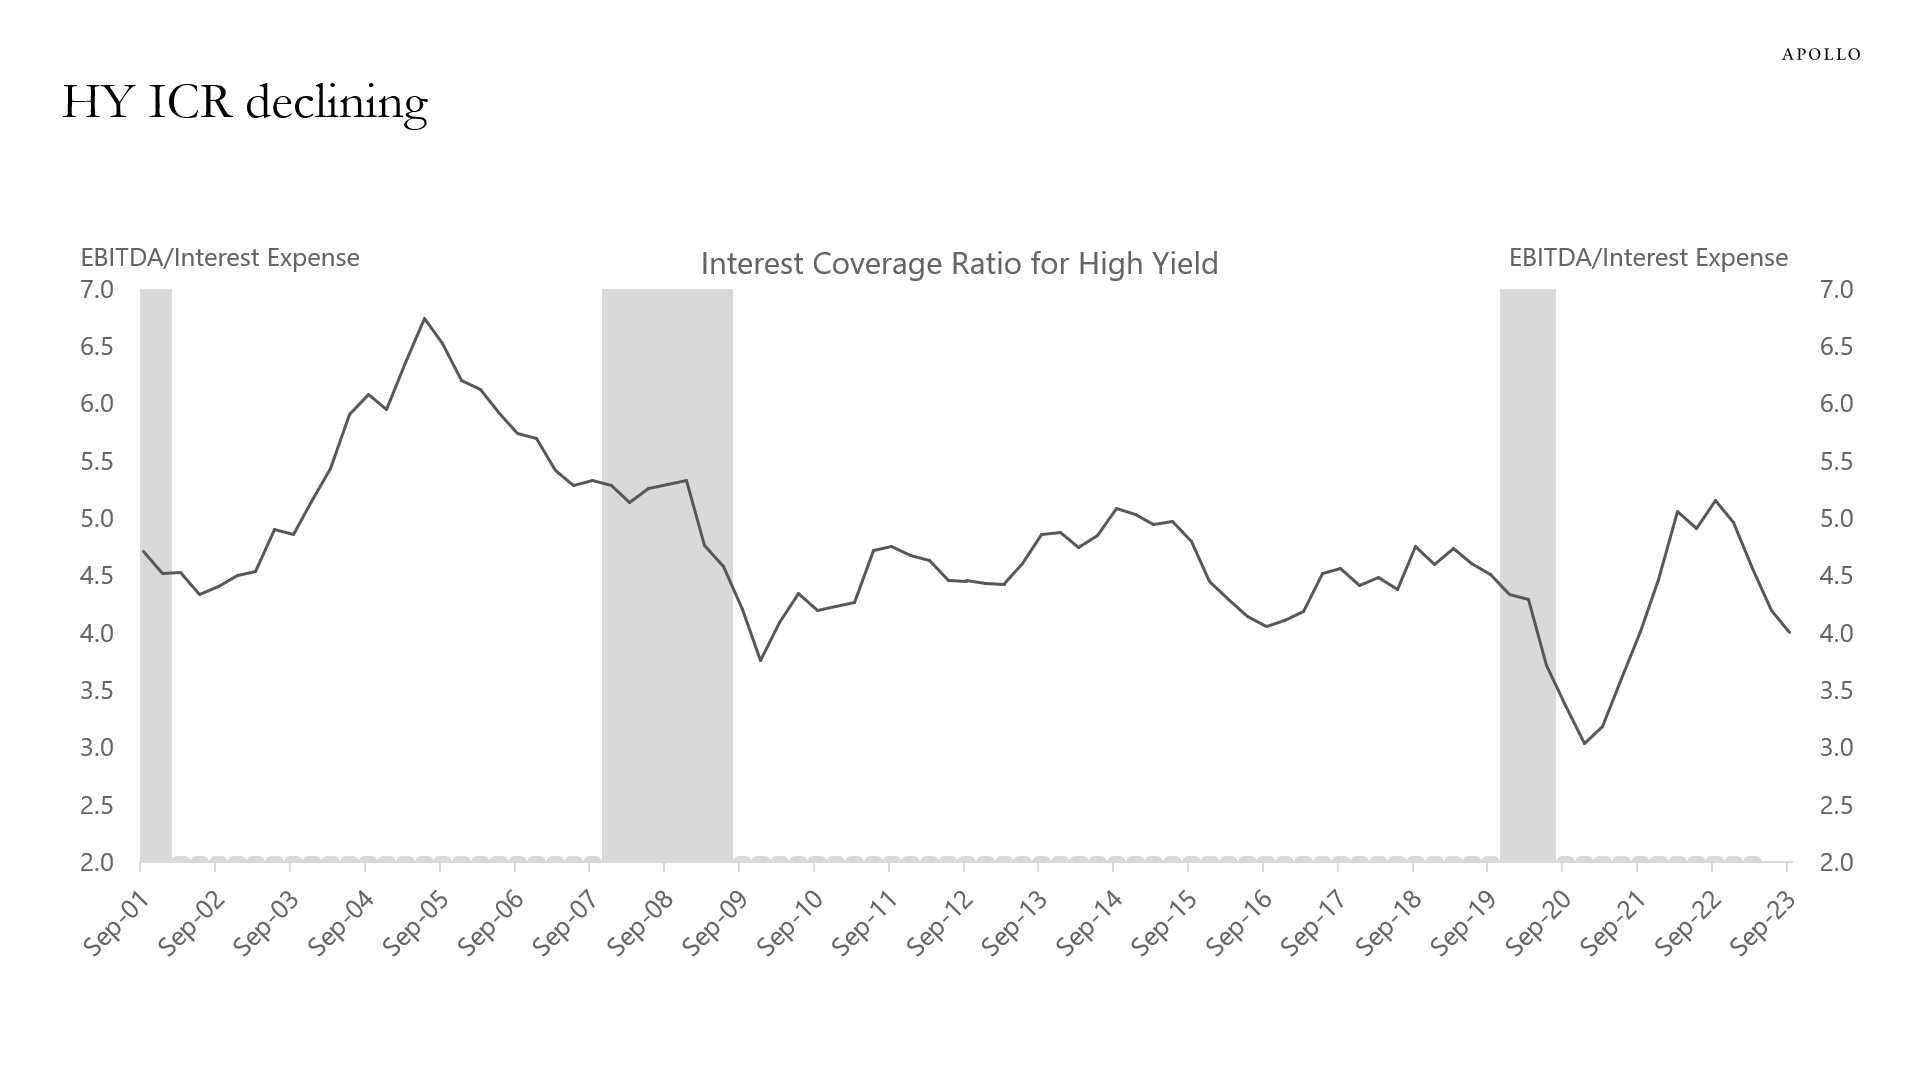 The interest coverage ratio for high yield bonds continues to fall. 